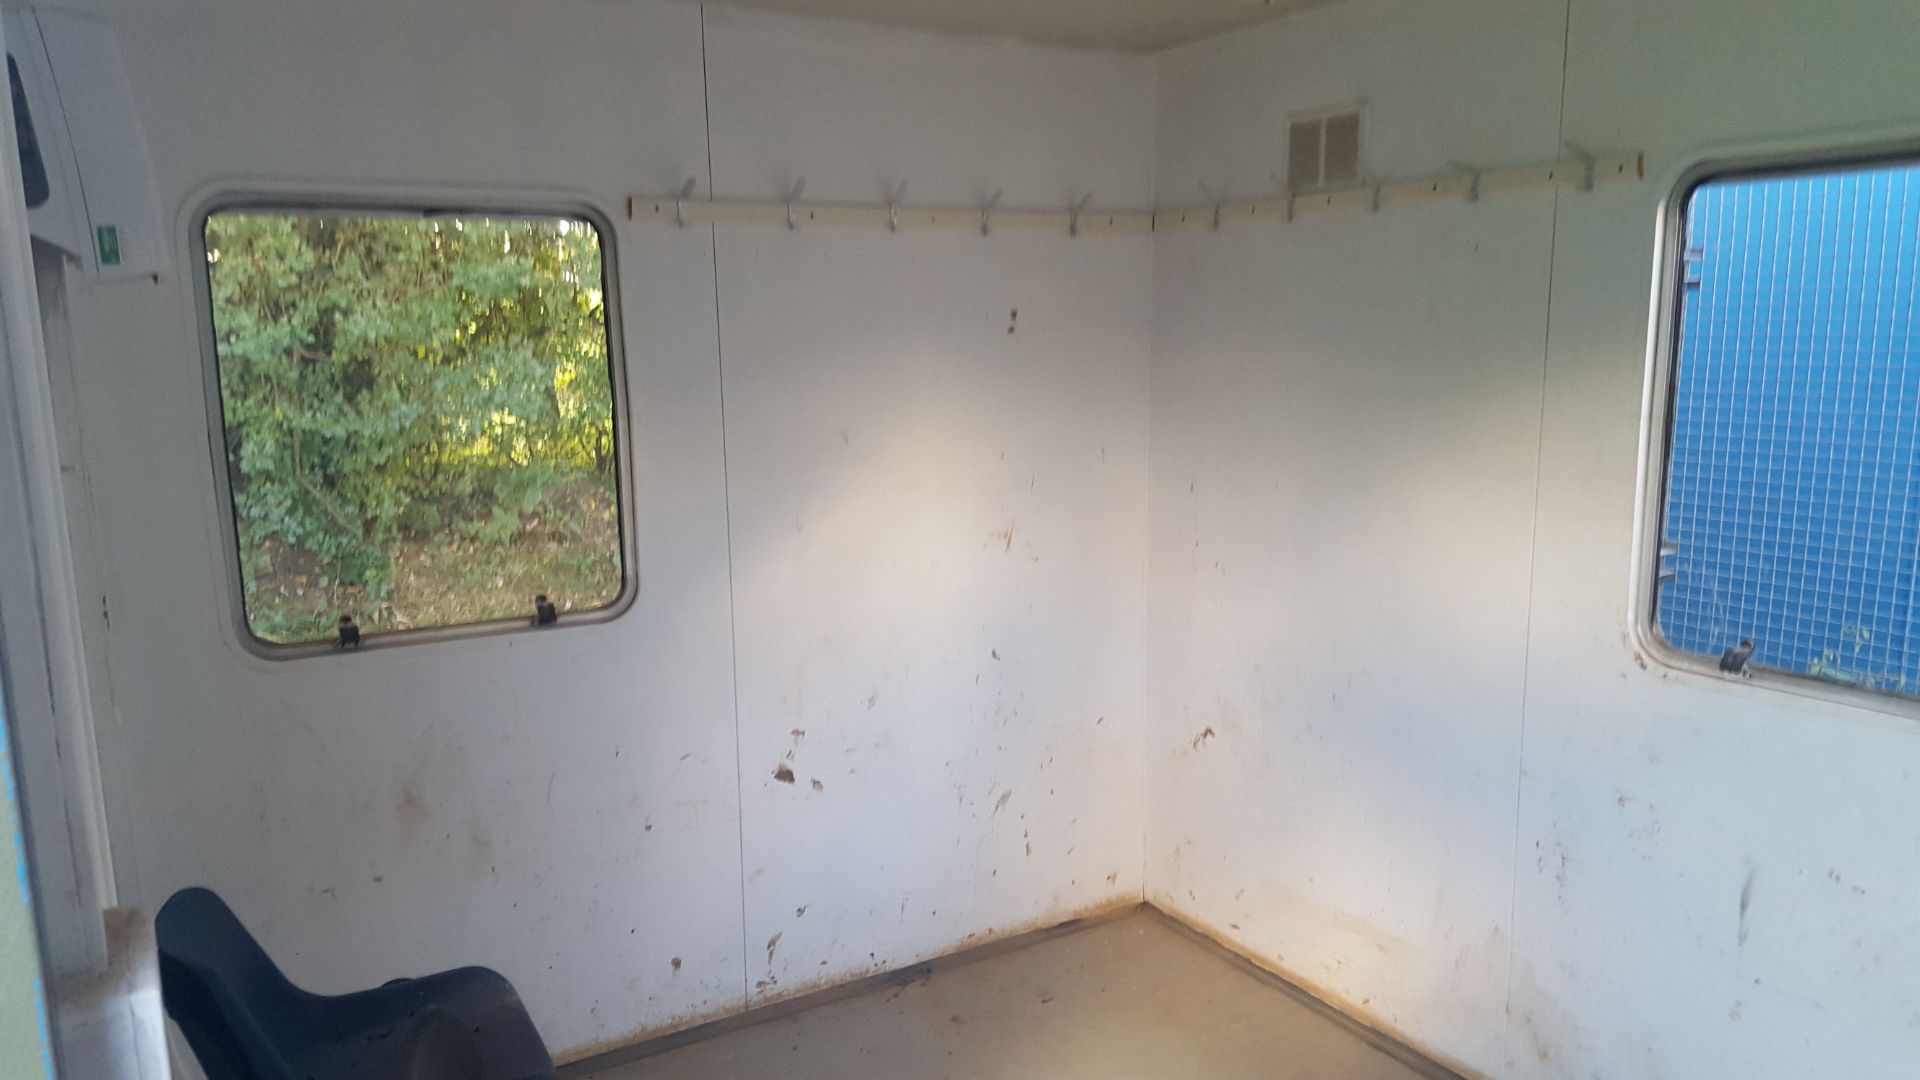 12 x 8 Drying Room / Office / Container - Image 5 of 9